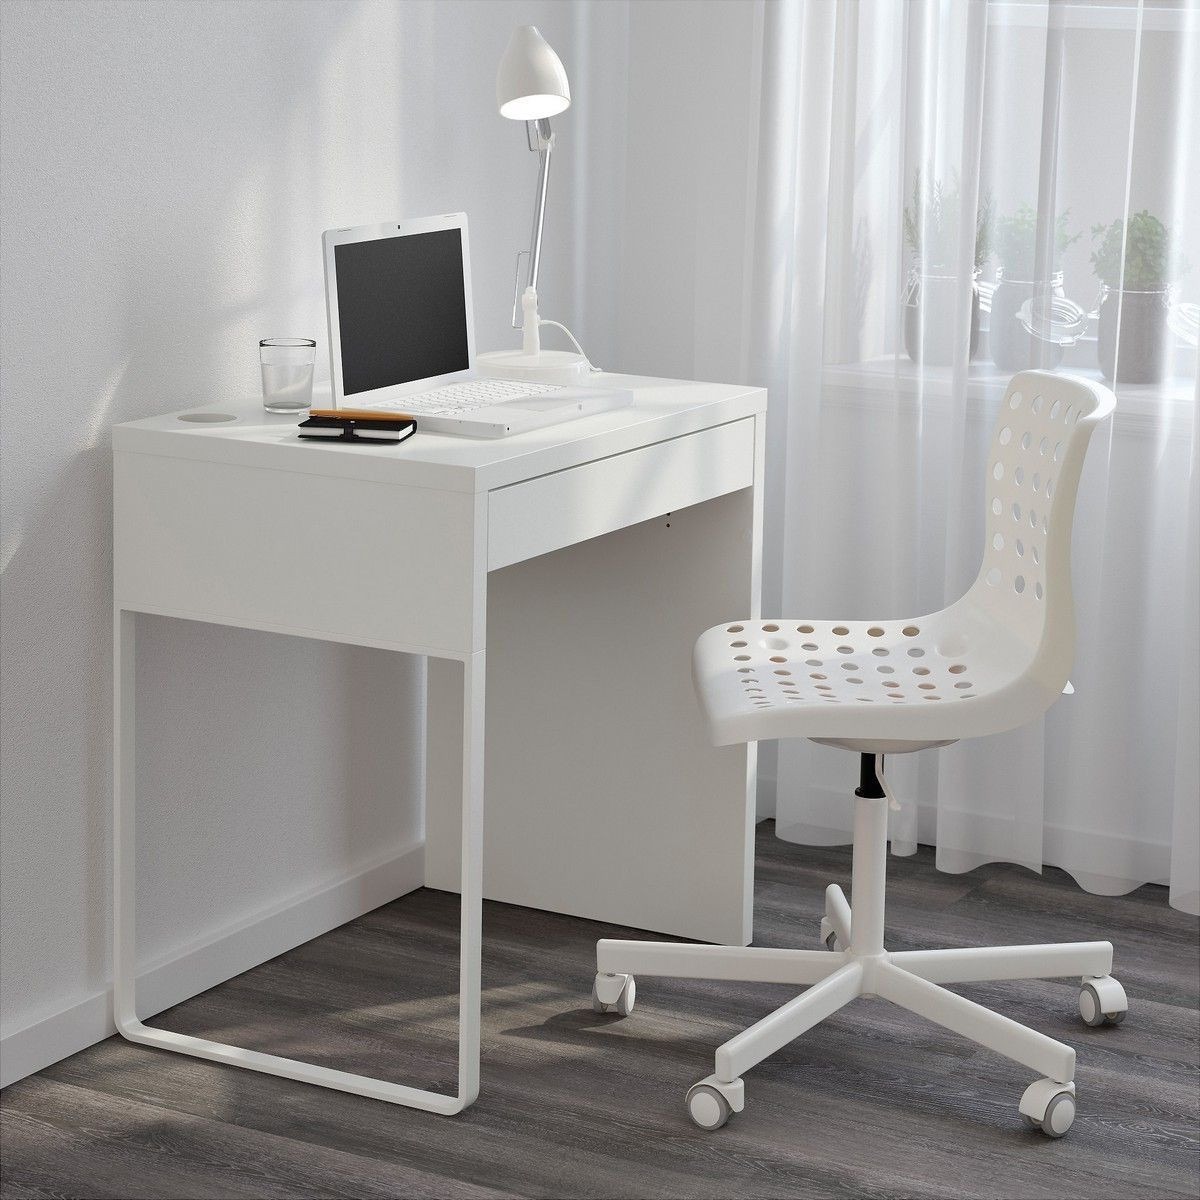 Computer Desk For Small Bedroom
 Desk Ideas Perfect for Small Spaces